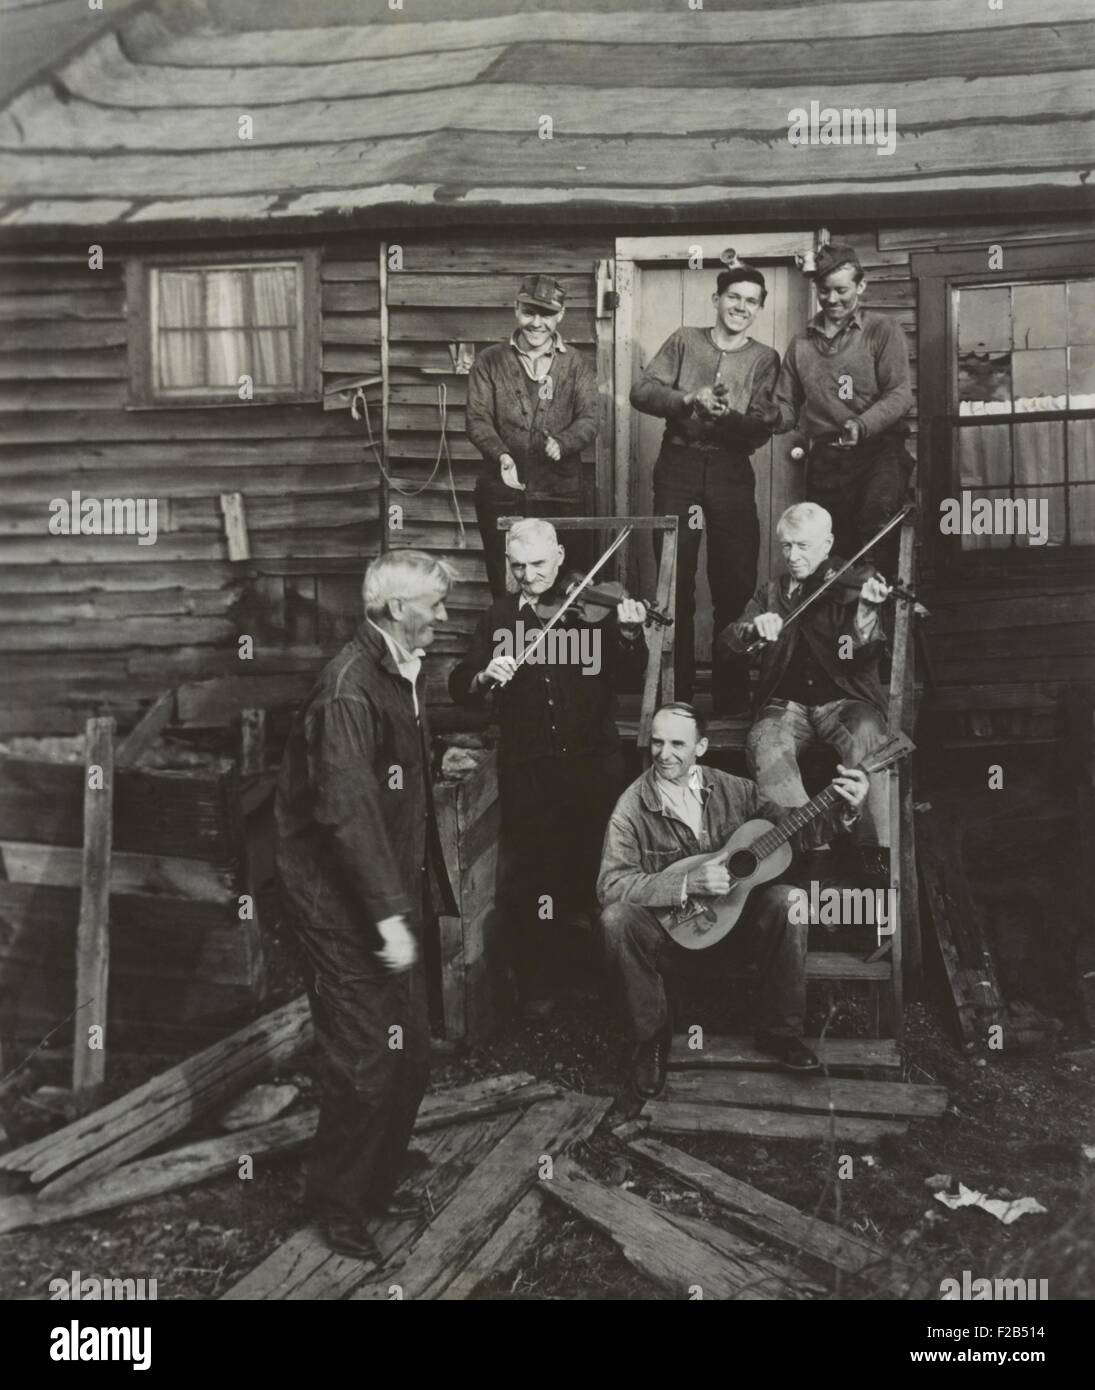 Staged hoedown in Pennsylvania with anthracite miners playing fiddles and a guitar. The session was recorded by folklorist George Korson. Ca. 1936-48. - (BSLOC_2015_1_160) Stock Photo